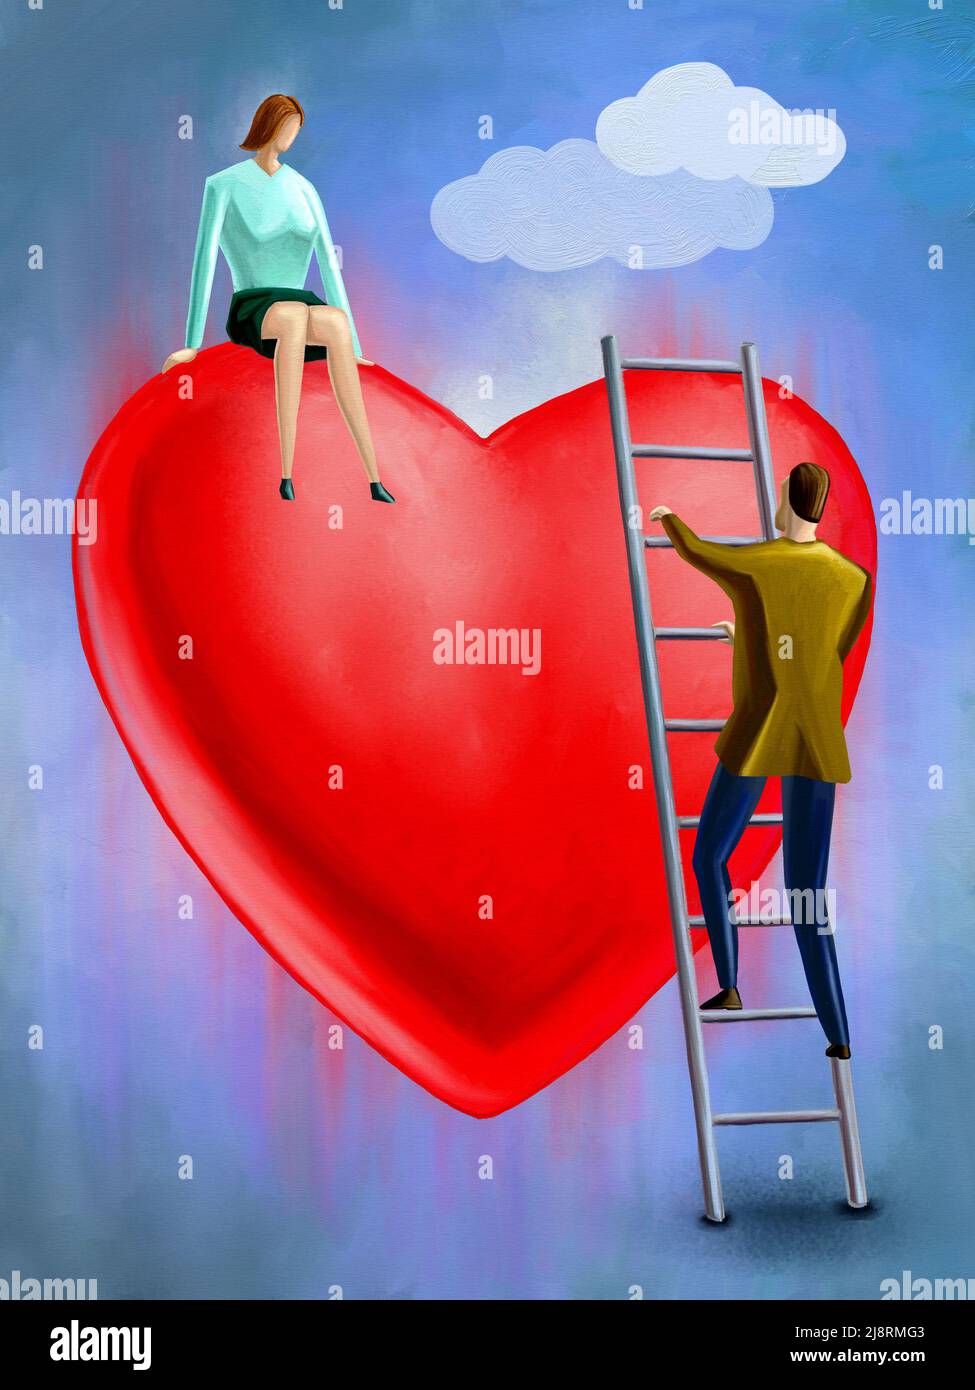 Man climbing a stair to reach for her lover. Digital painting. Stock Photo